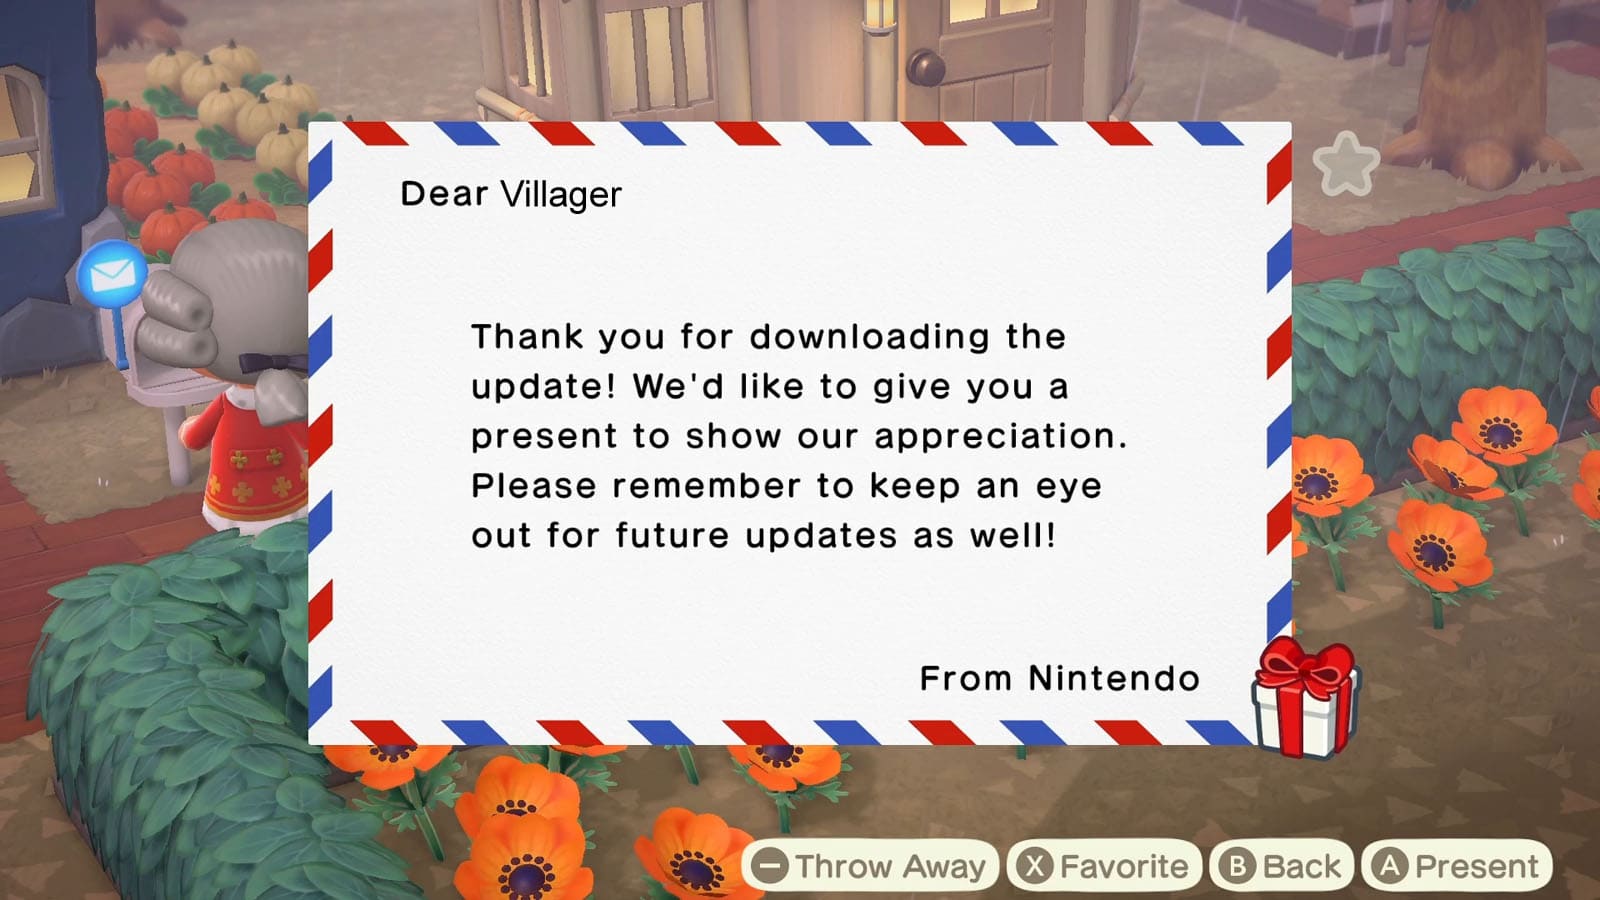 A letter from Nintendo